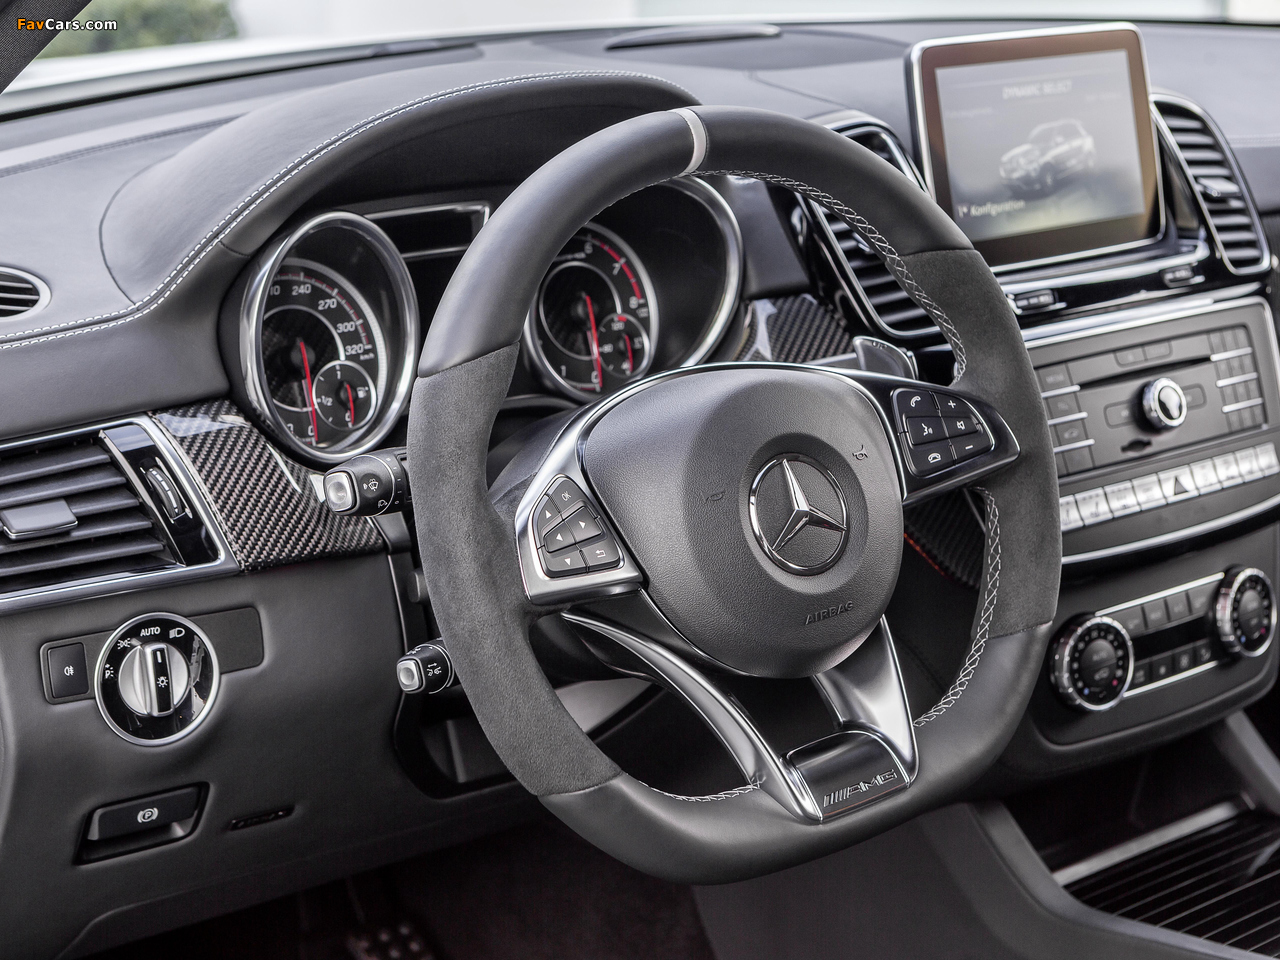 Mercedes-AMG GLE 63 S 4MATIC (W166) 2015 pictures (1280 x 960)